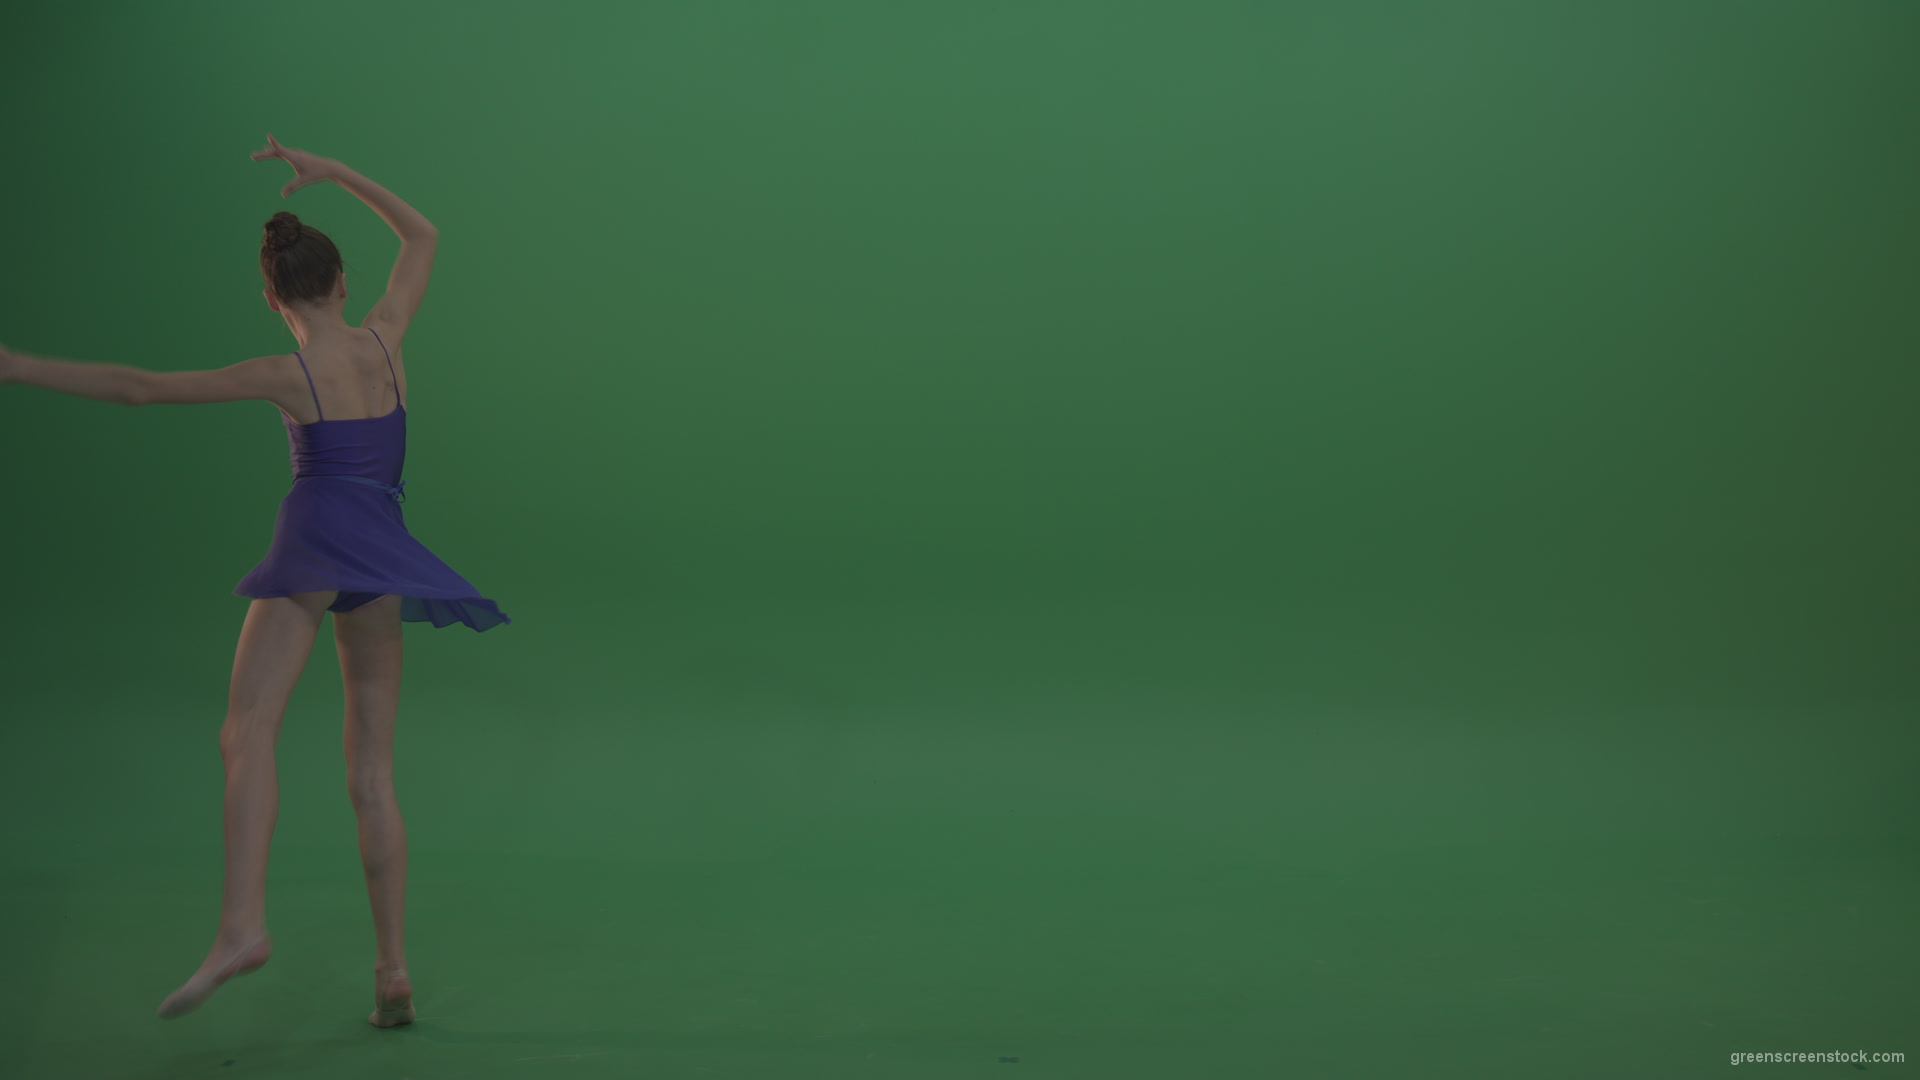 Young_Gymnast_Showing_Marvelous_Technical_Dance_Swan_Ballet_Moves_Technical_Performance_Of_Rhythmic_Artistic_Gymnastics_On_Green_Screen_Wall_Background_006 Green Screen Stock